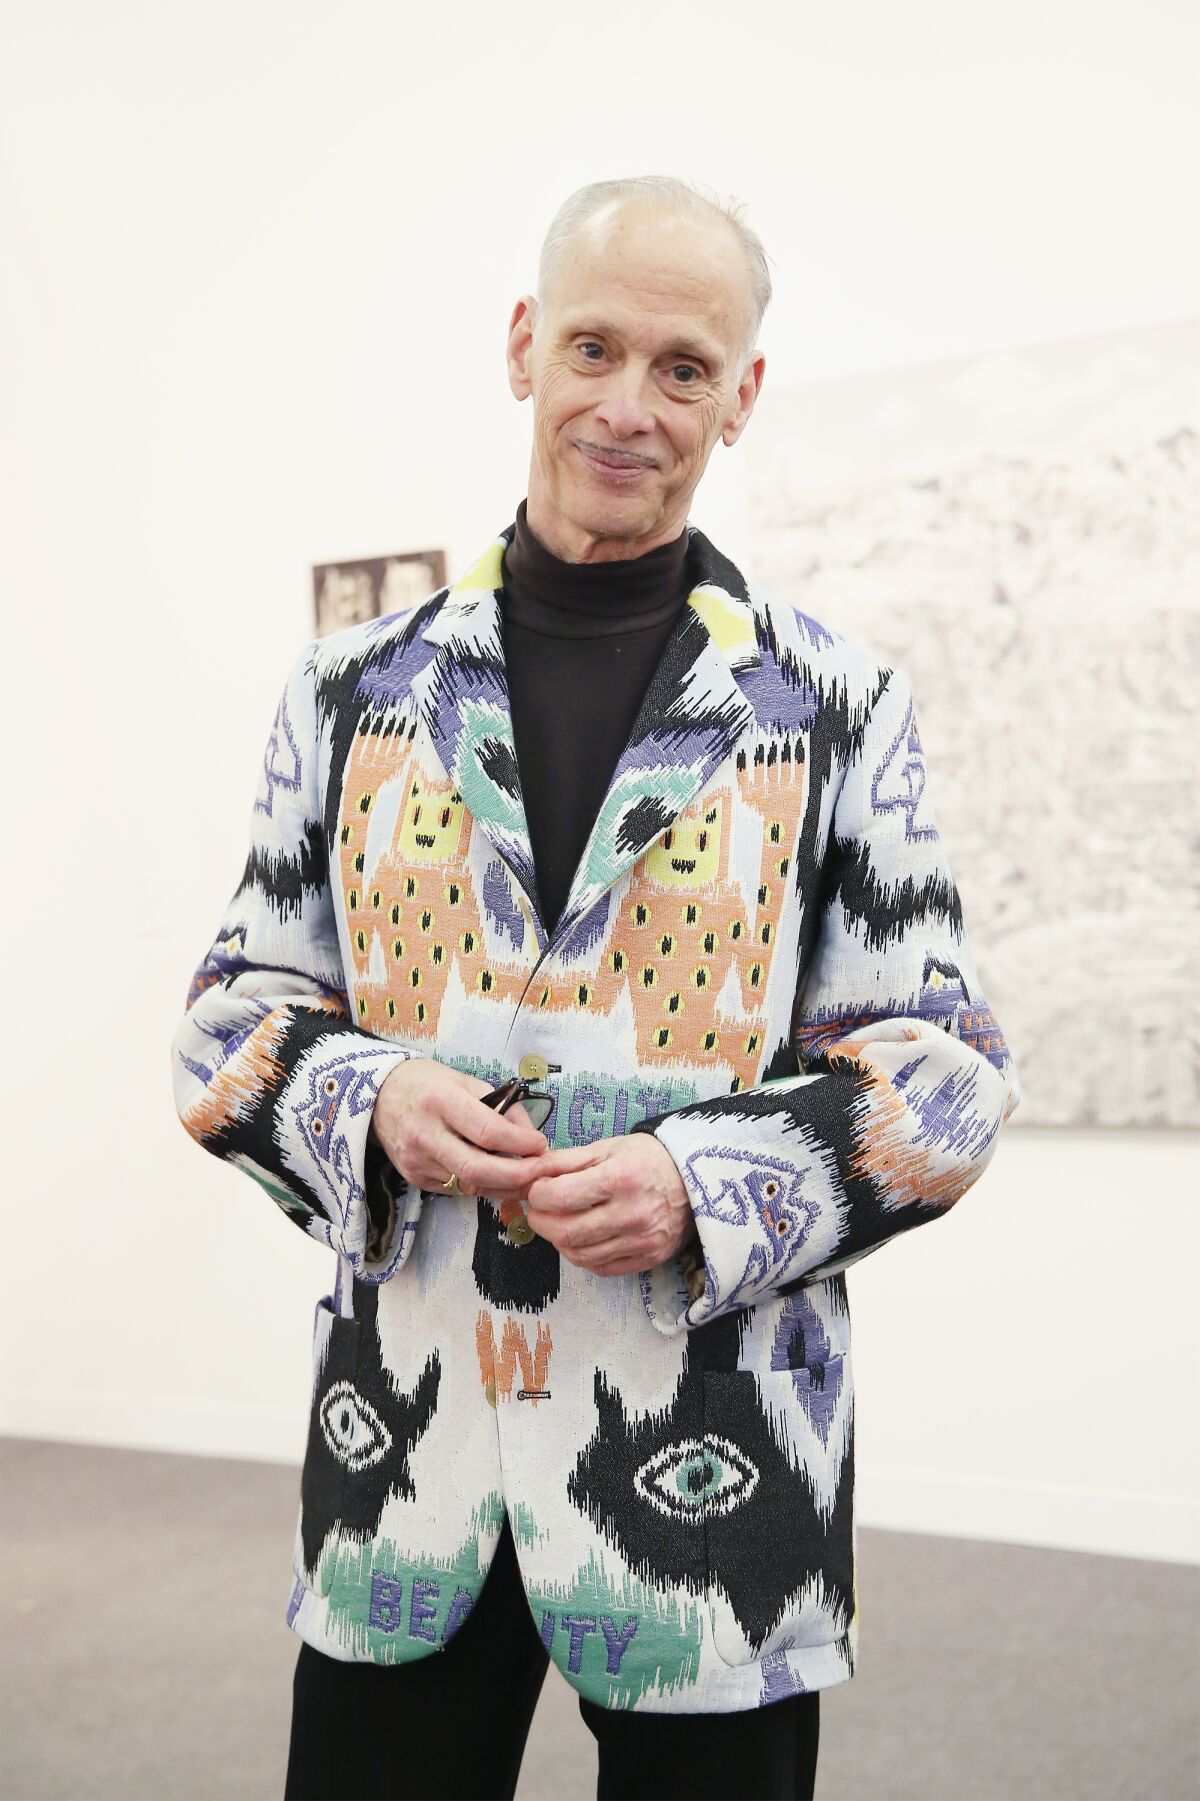 A photo of Director John Waters